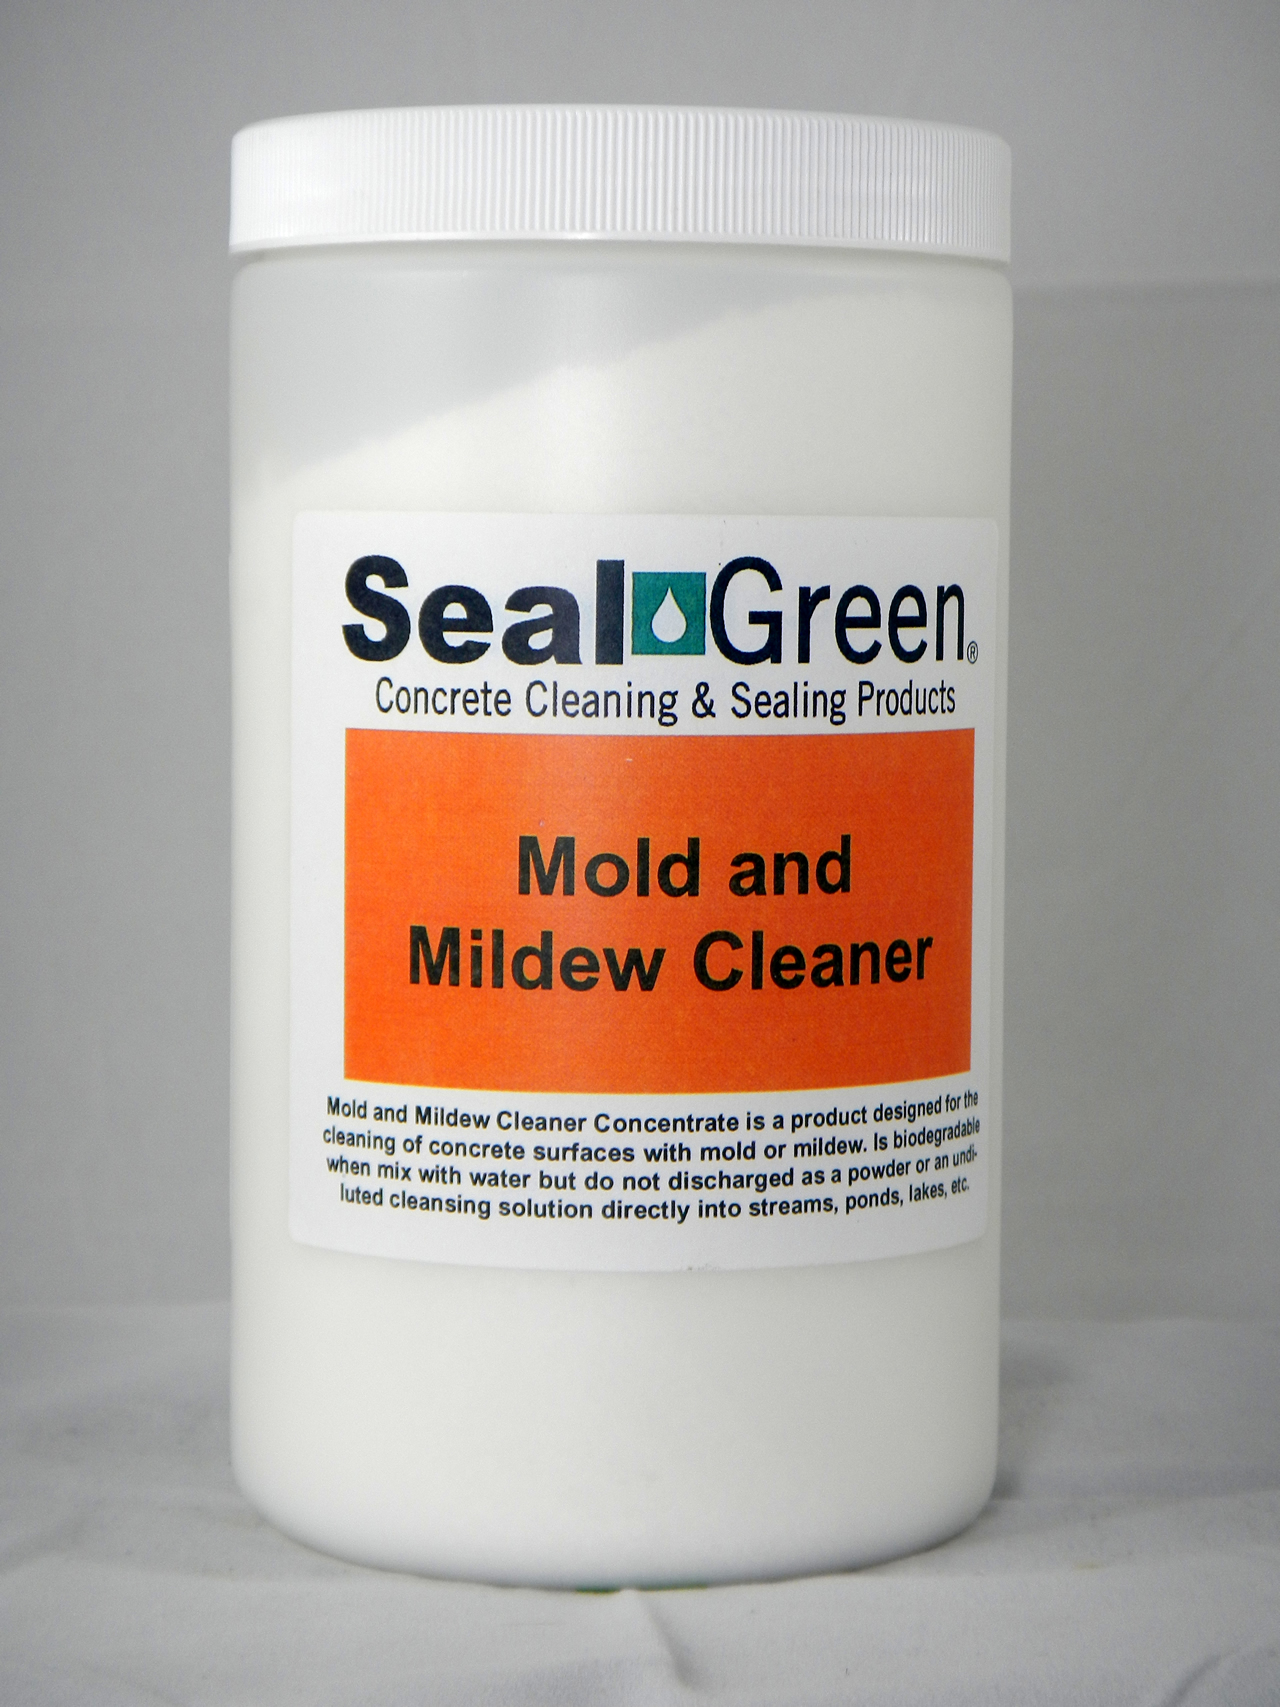 The SealGreen paver cleaner says in bold "Do not allow to dry," but below that says it can be left overnight and wi